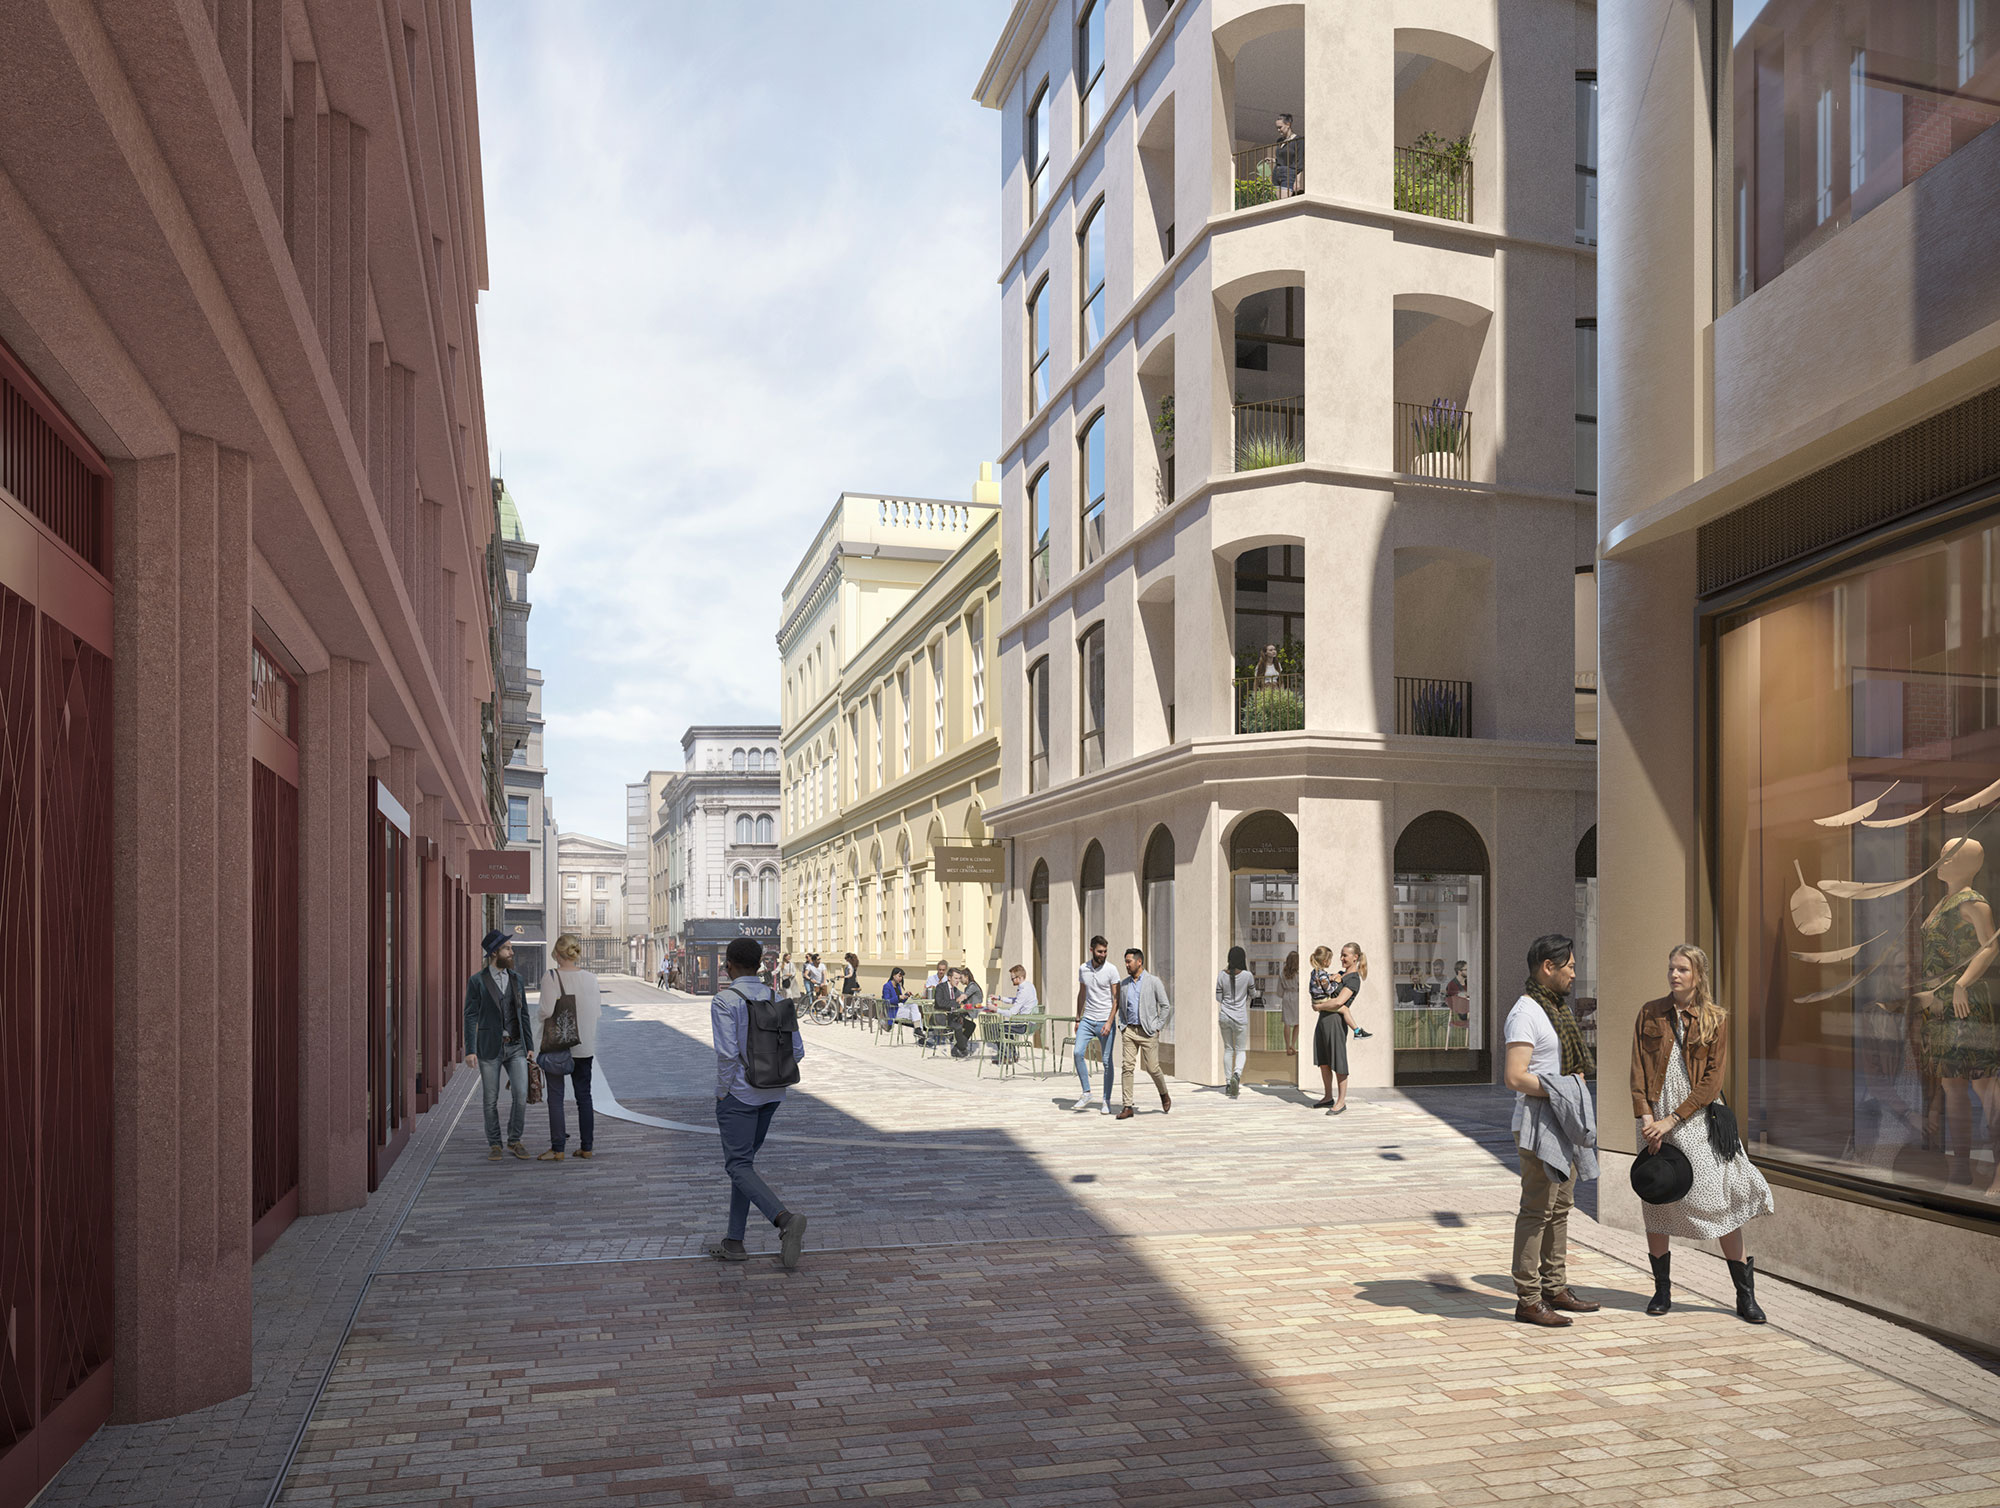 Proposals for Vine Lane looking north